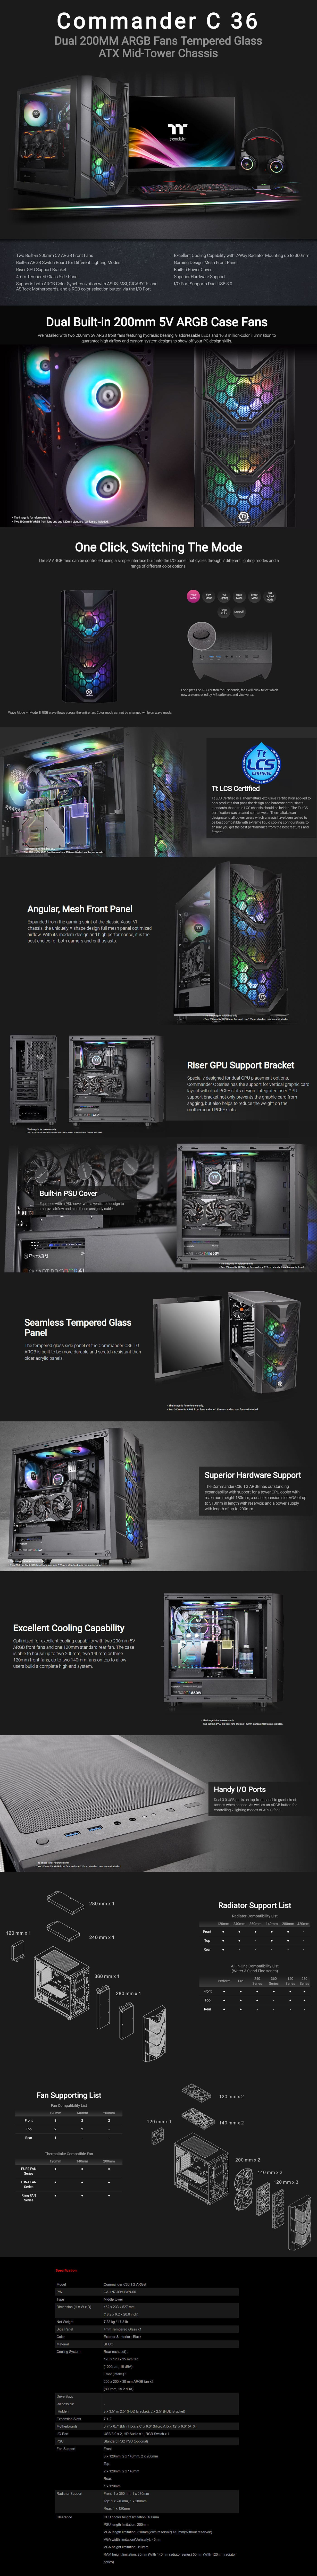  Buy Online Thermaltake Commander C 36 Dual 200MM ARGB Fans Tempered Glass ATX Mid-Tower Chassis (CA-1N7-00M1WN-00)